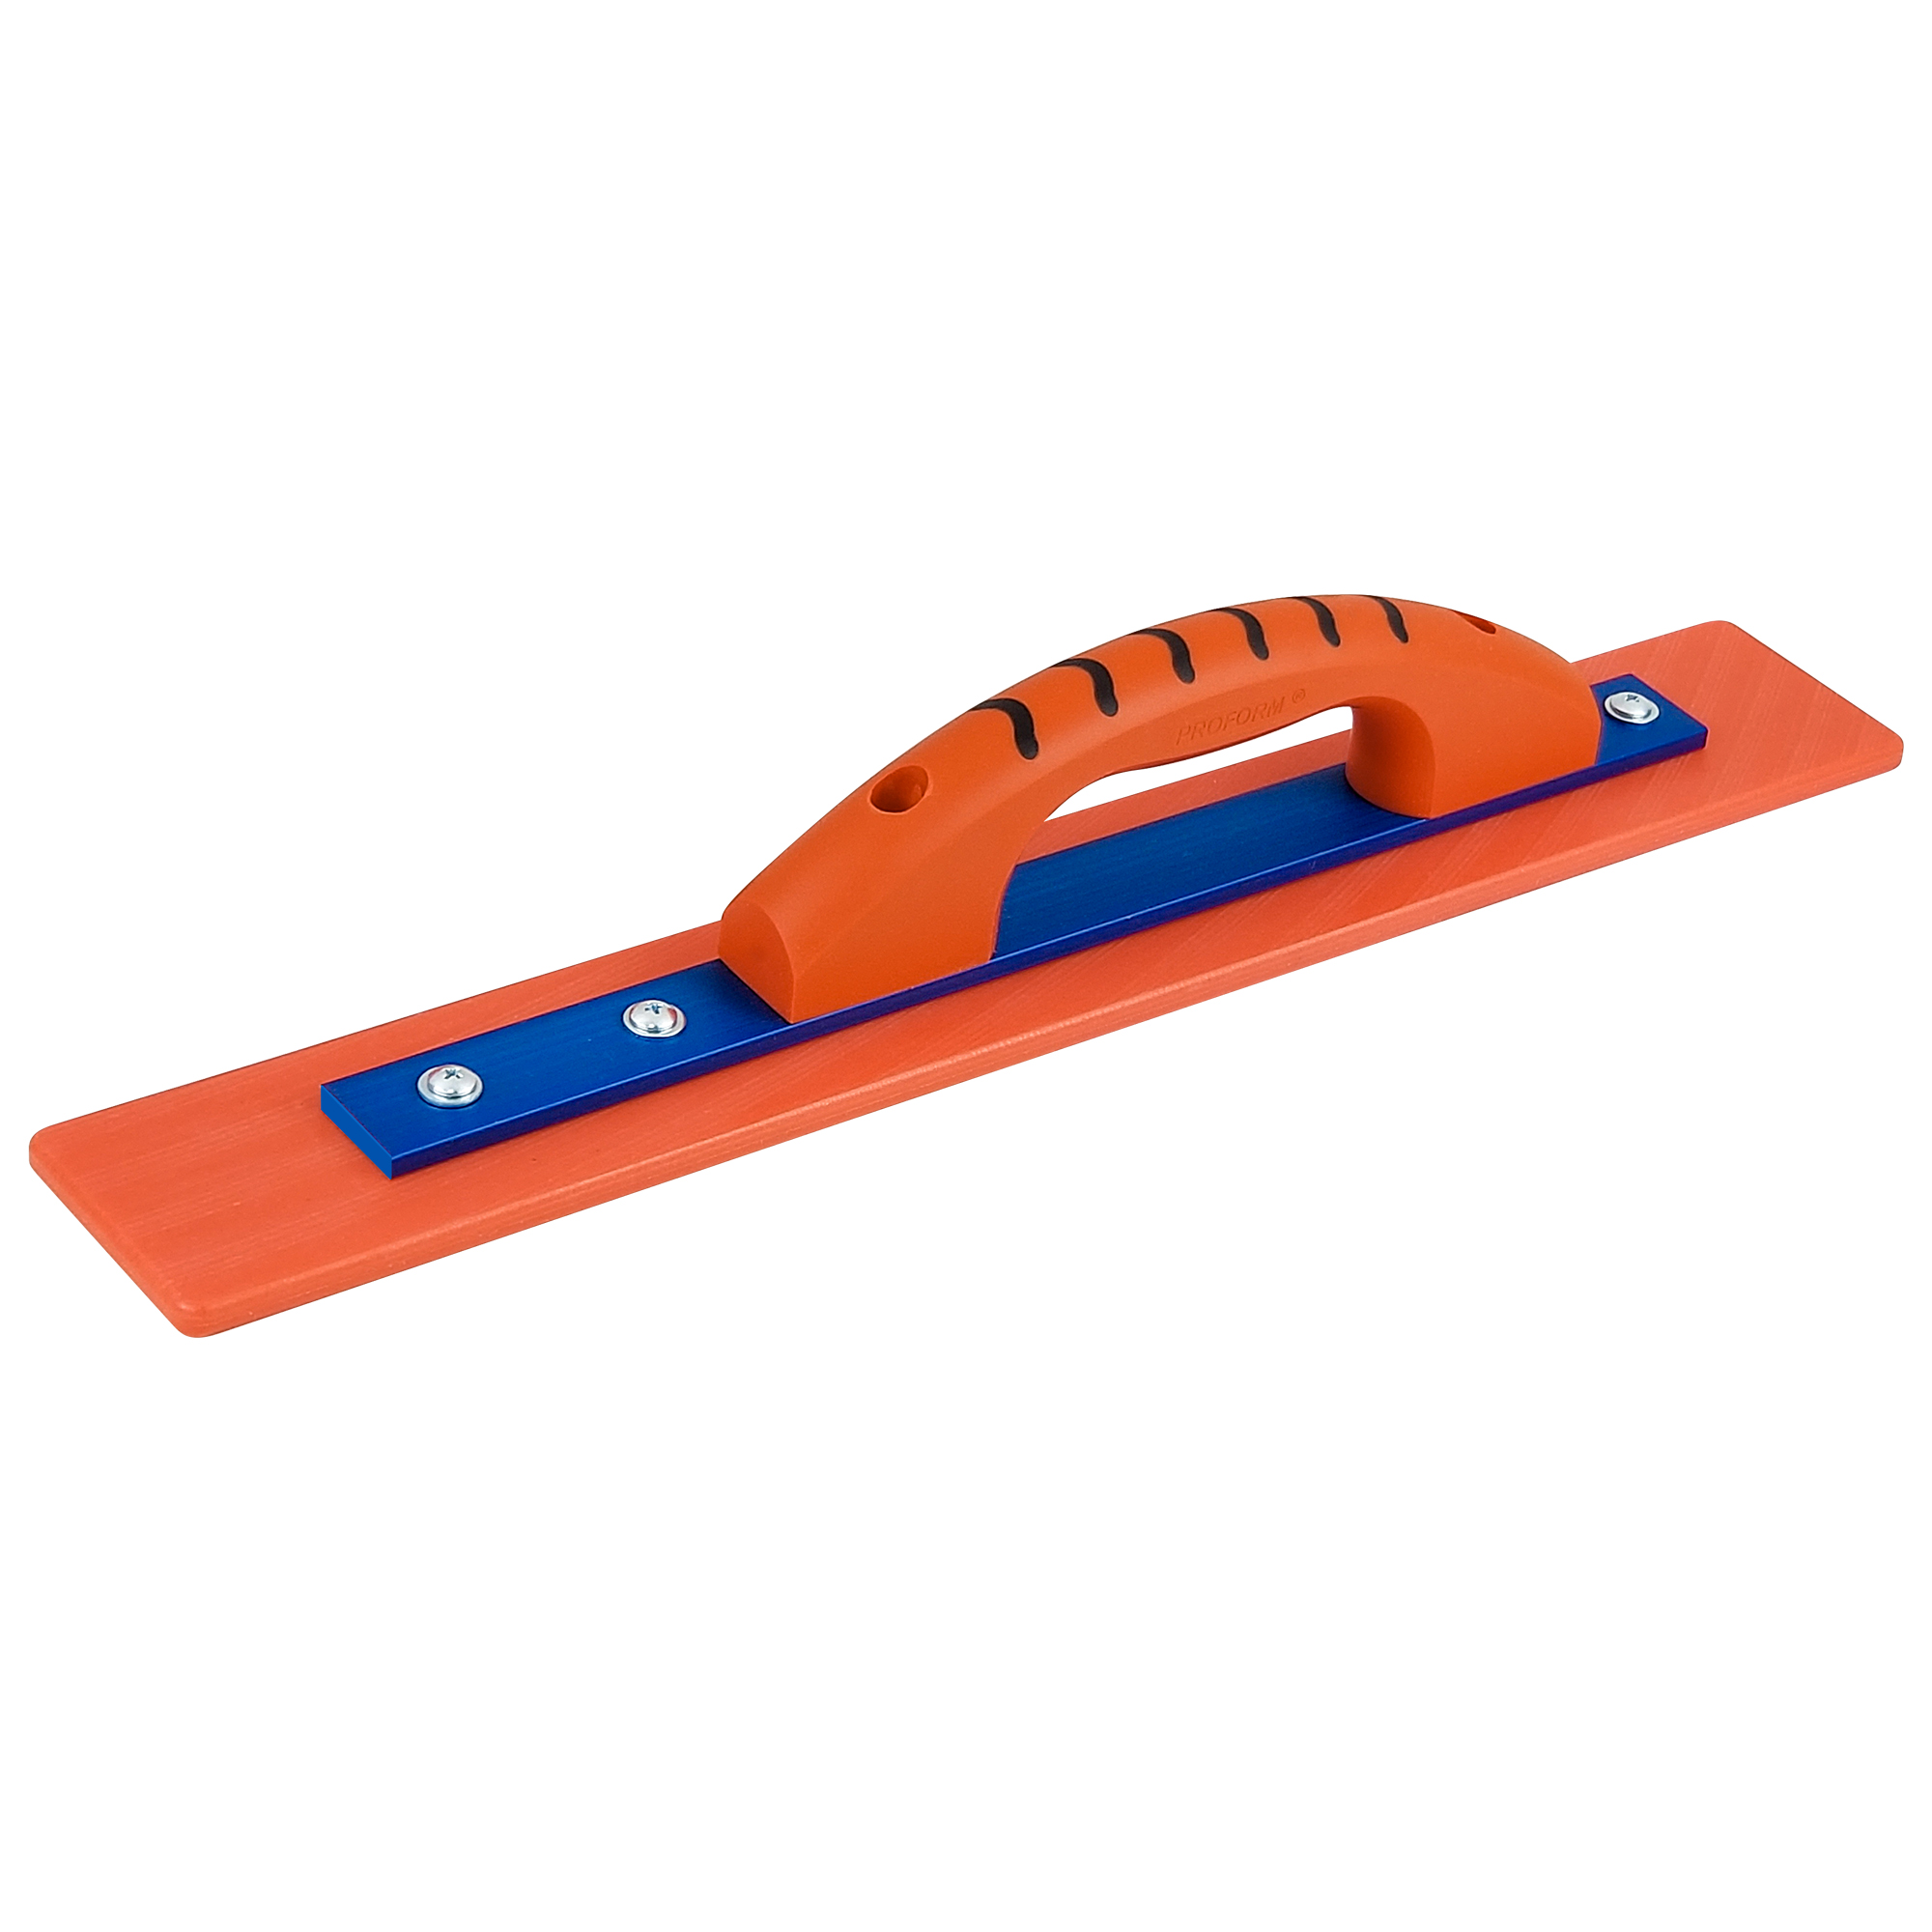 Kraft 20in x 3in Orange Thunder™ with KO-20™ Technology Hand Float with ProForm® Handle - Hand Floats & Darbies